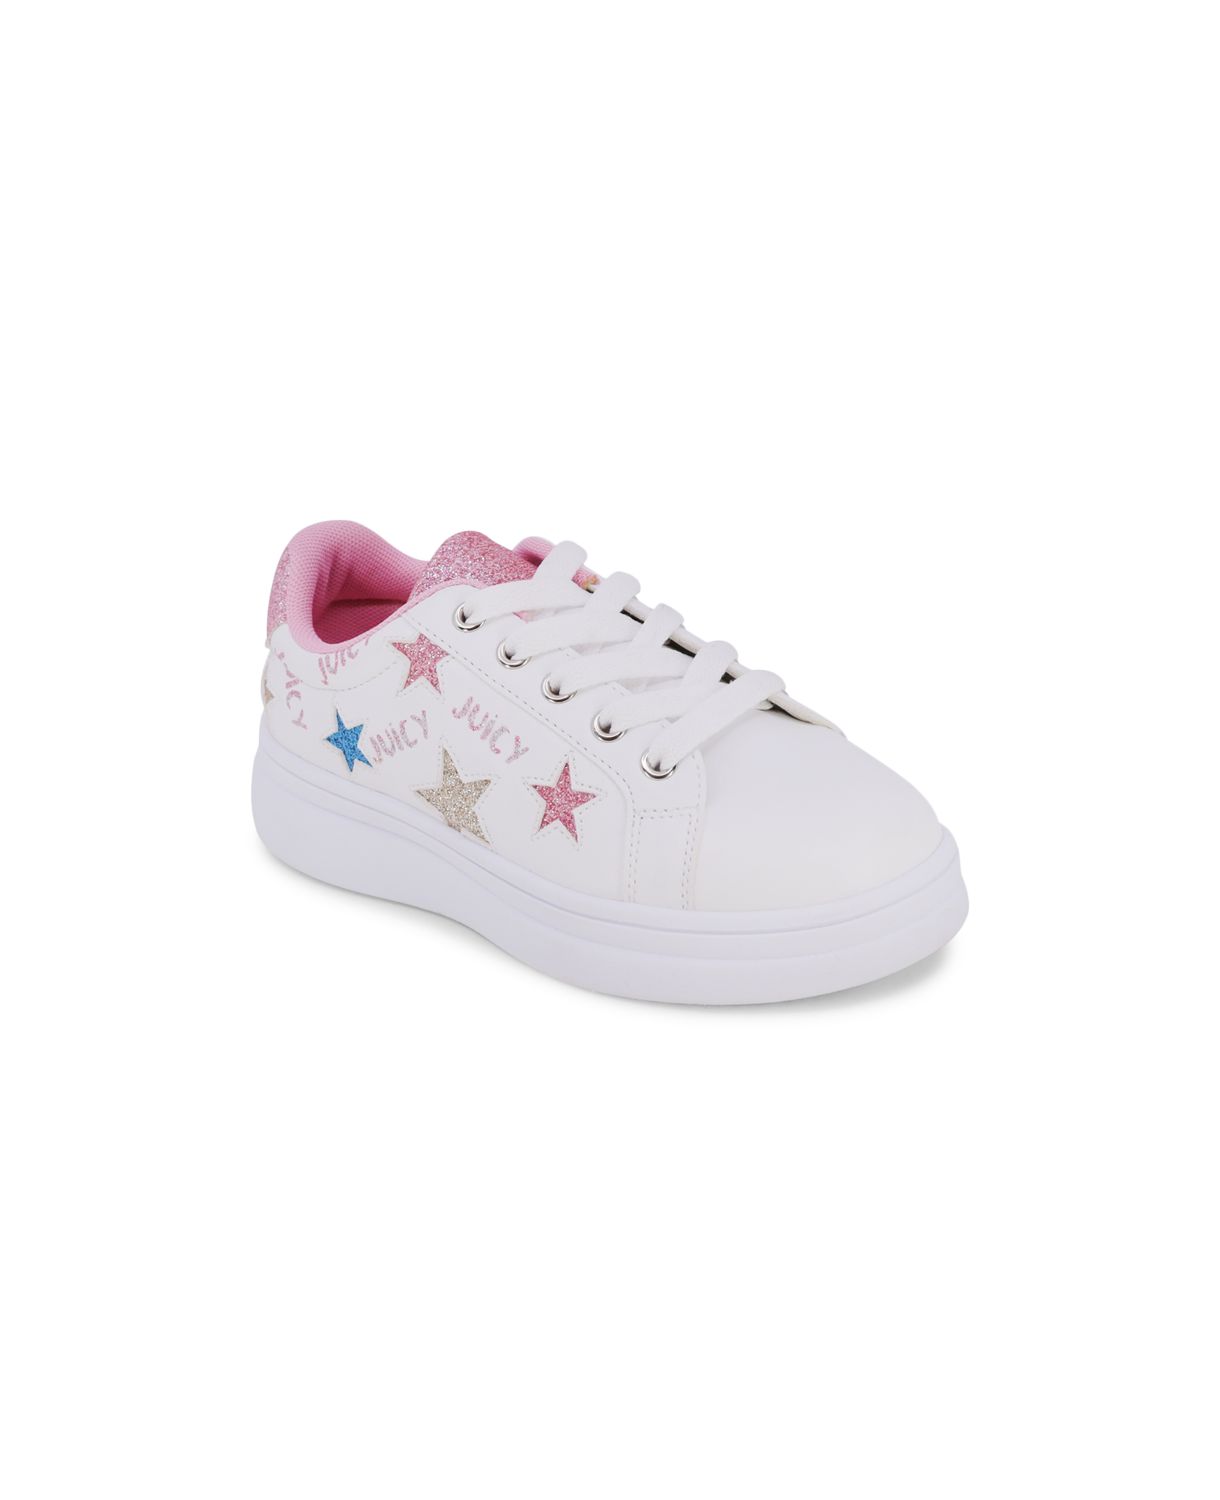 Кроссовки Girl's Glitter Star Juicy Couture